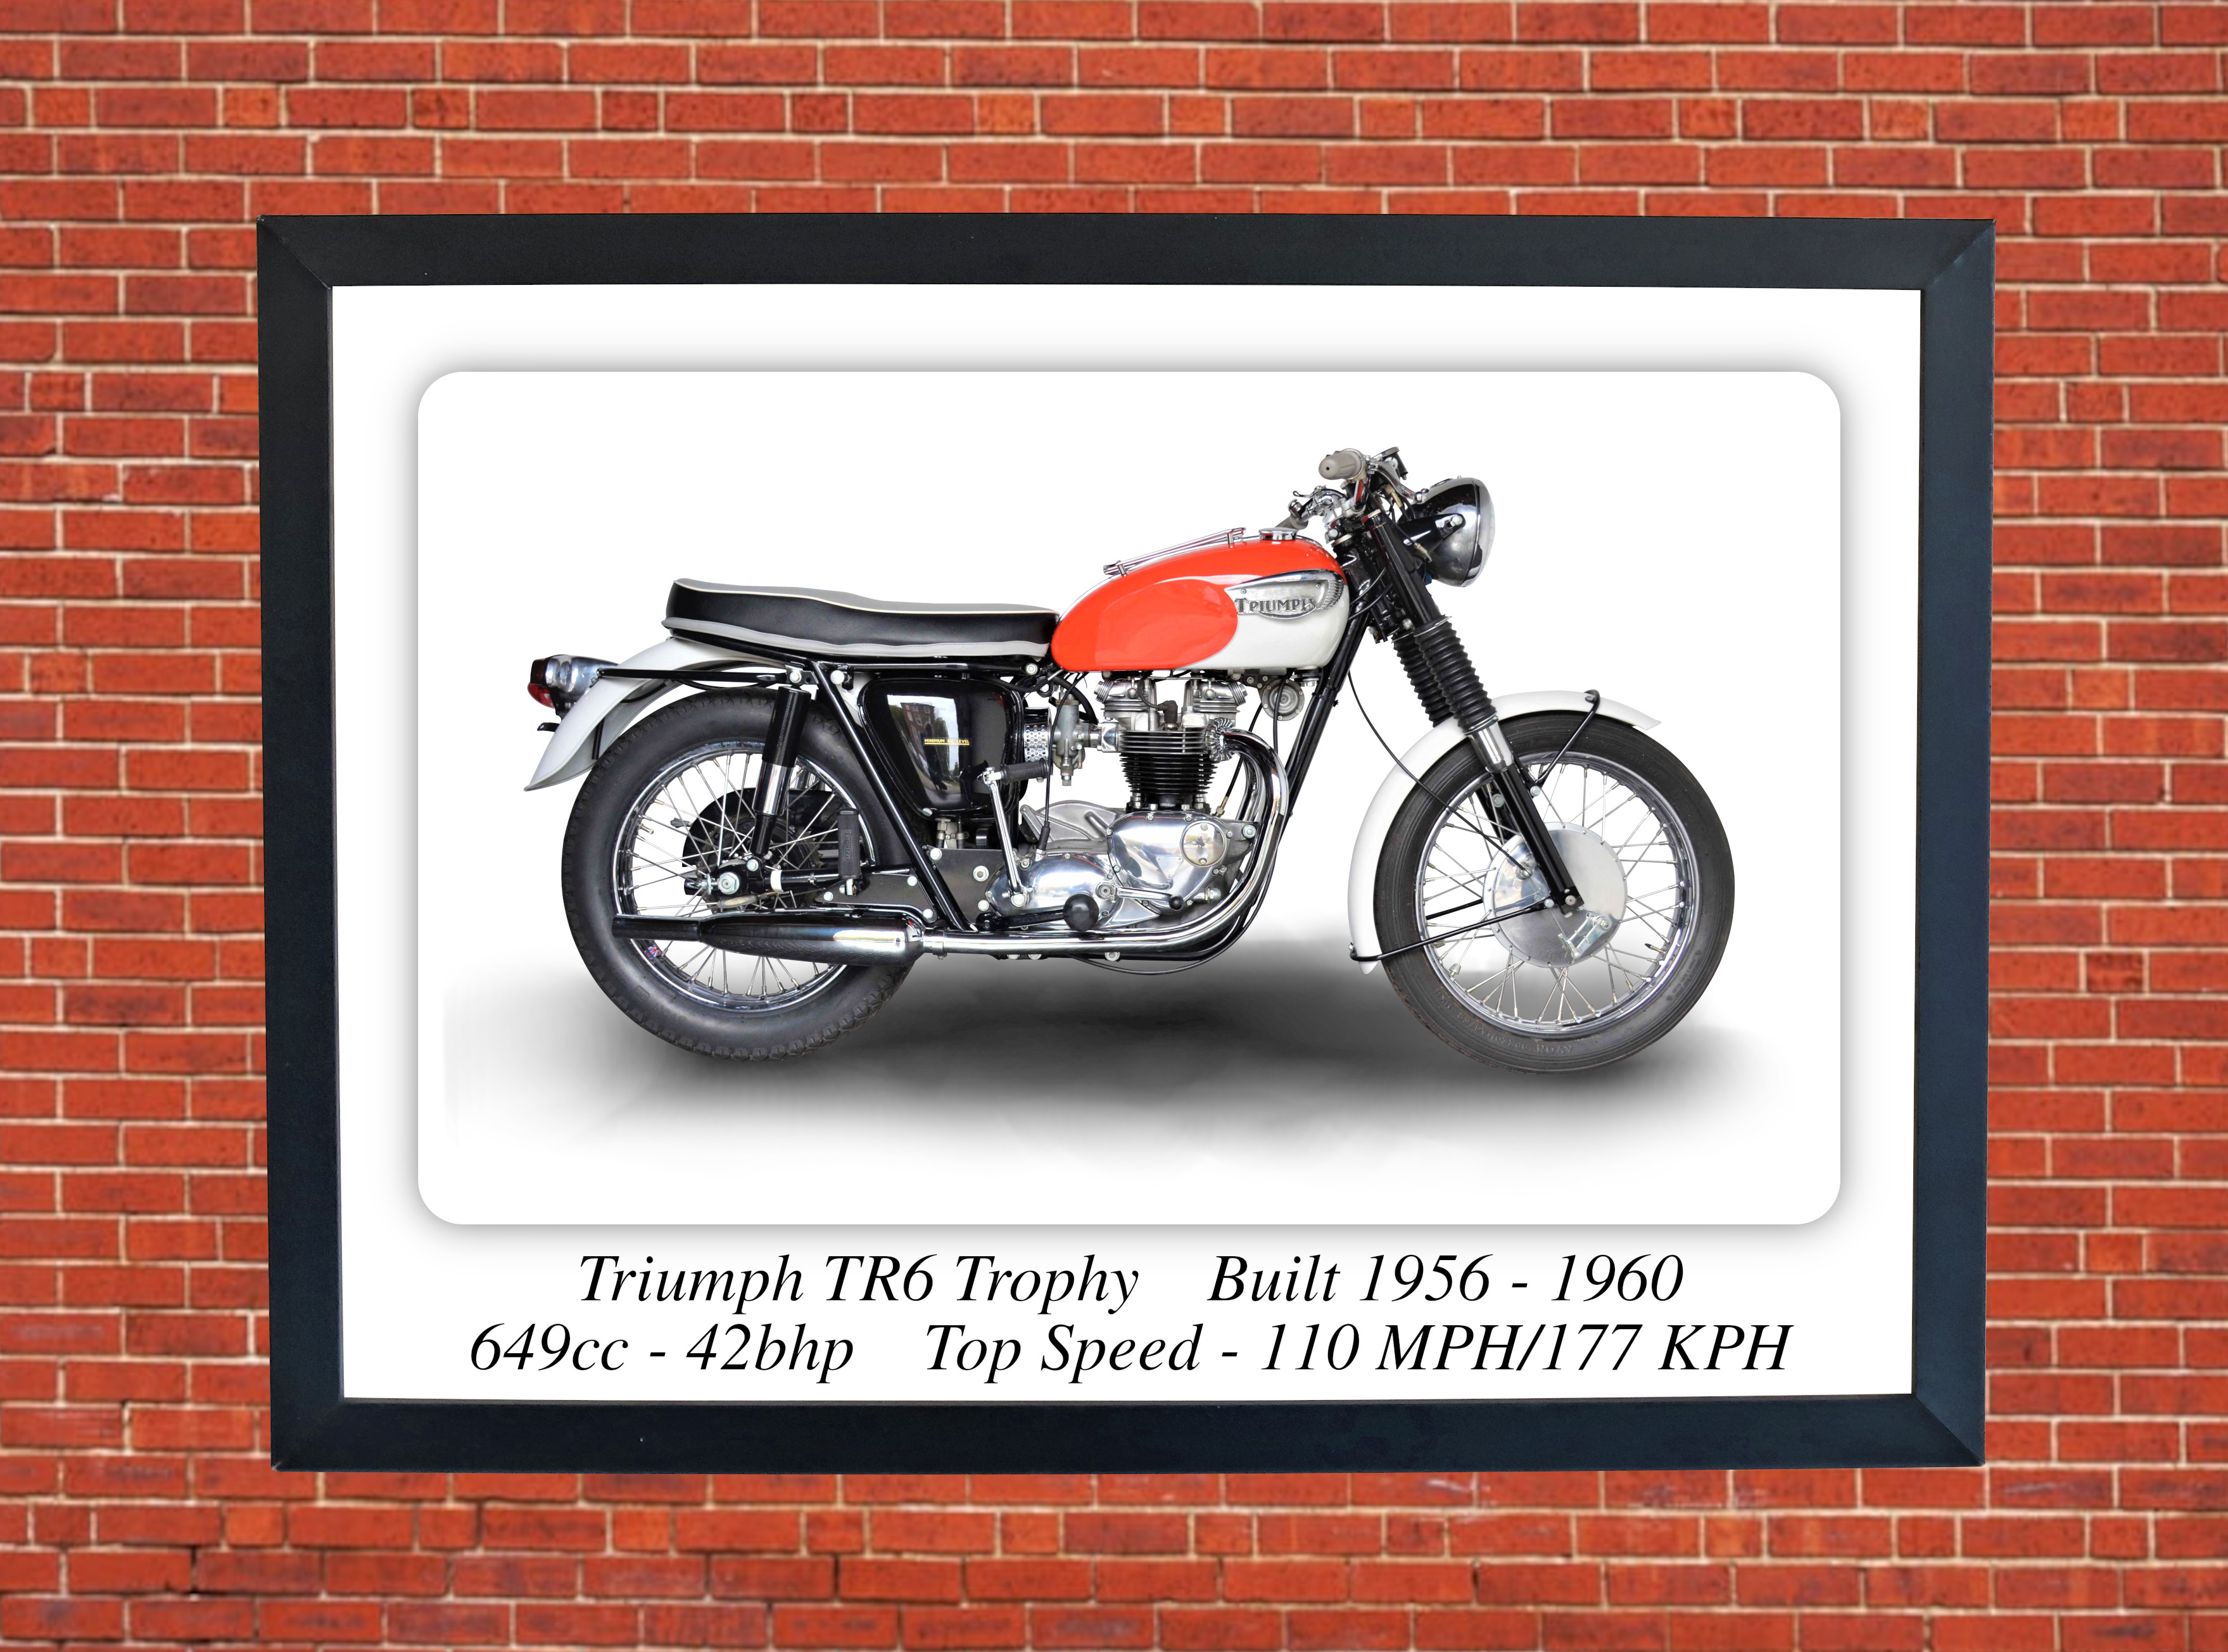 Triumph TR6 Trophy Motorcycle - A3/A4 Size Print Poster